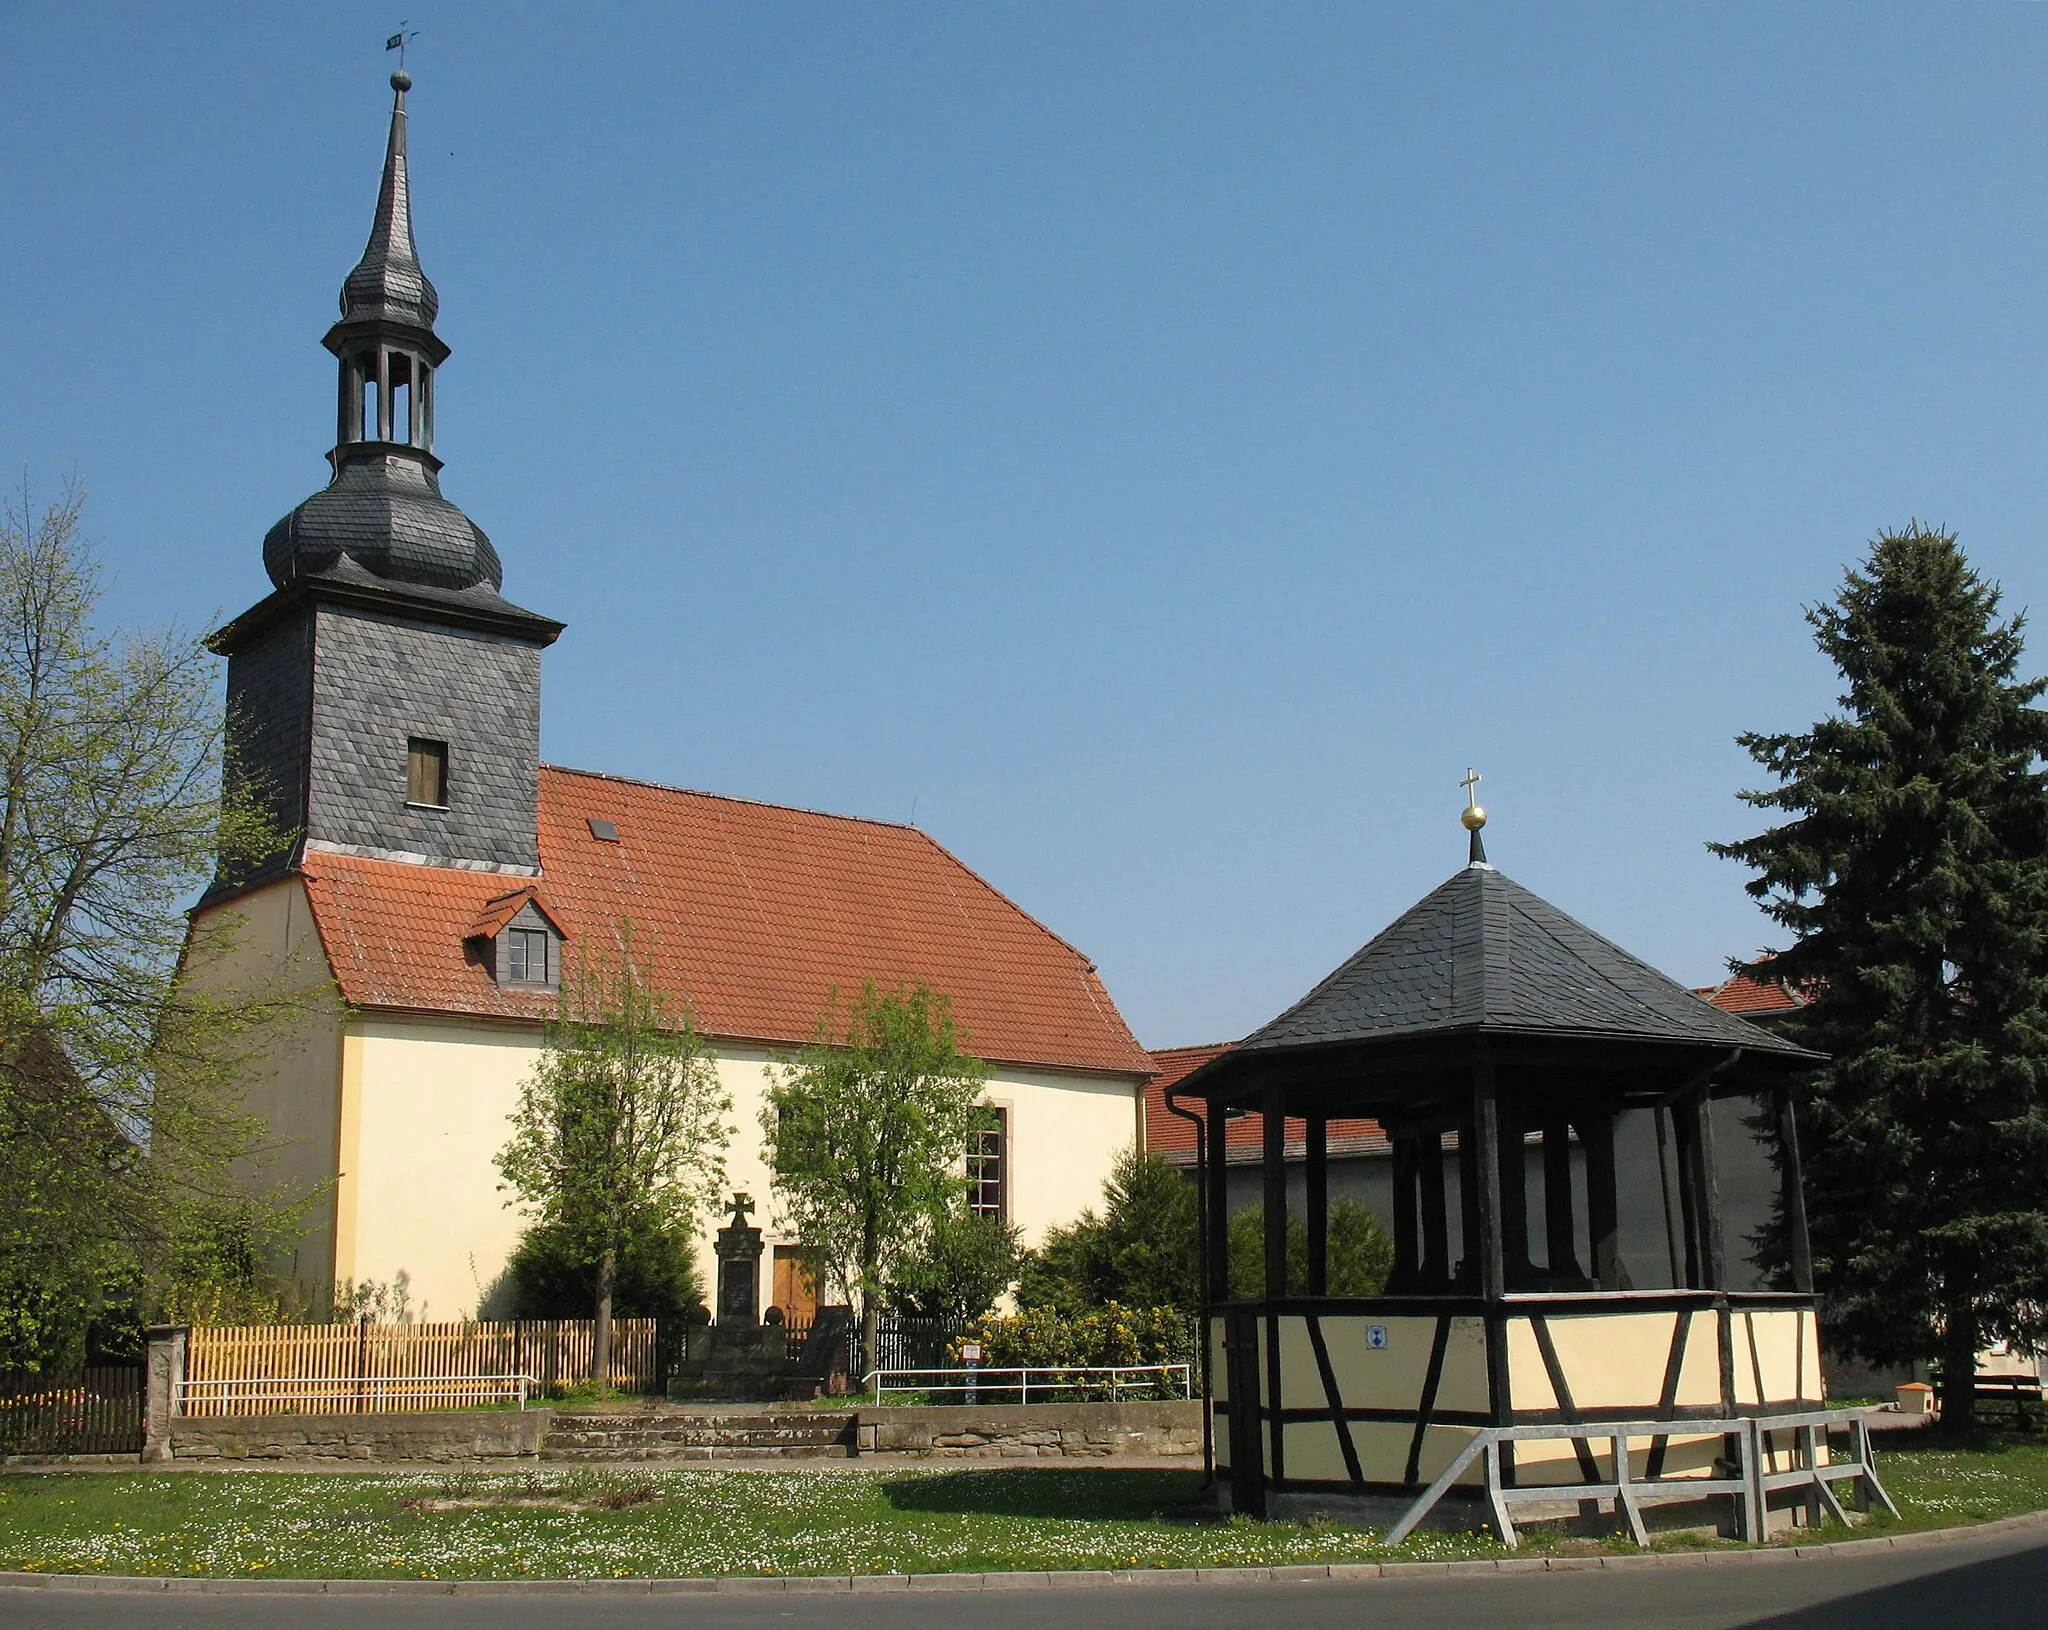 Photo showing: Church and bell tower in Finneland-Kahlwinkel in Saxony-Anhalt, Germany